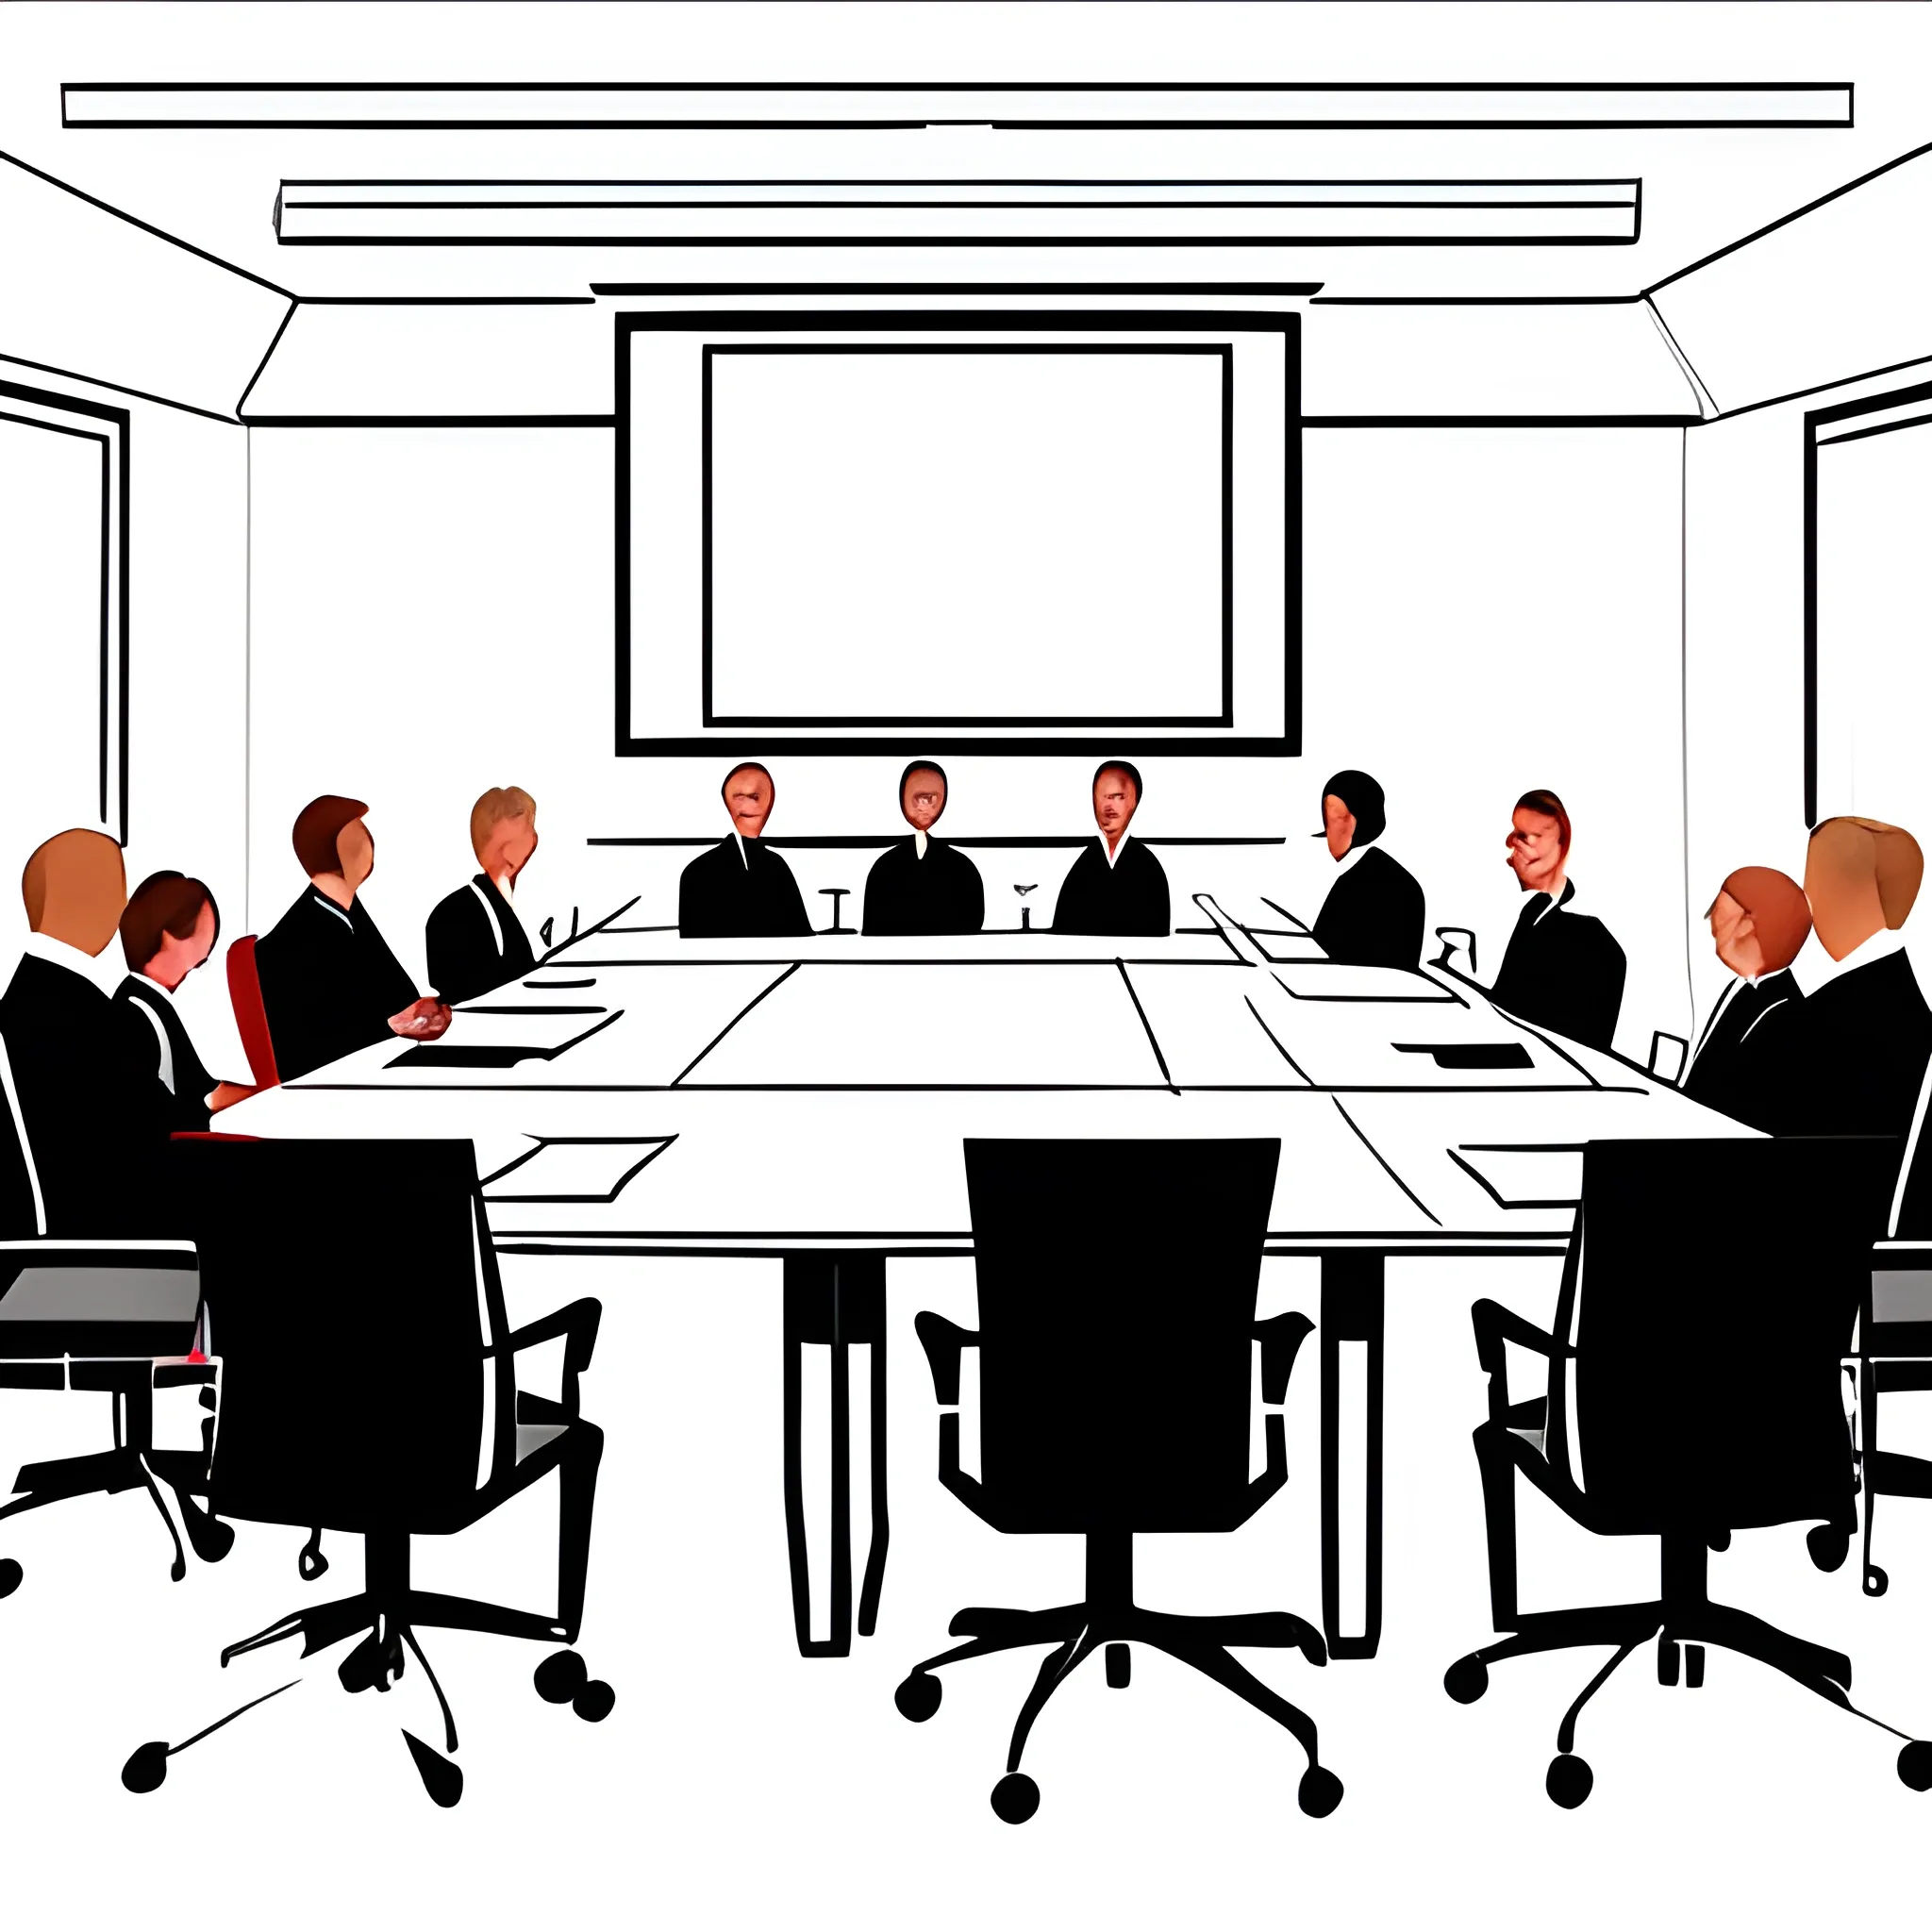 facilitating a meeting from the floor in a large board room scene, casual dress, clip art, Pencil Sketch